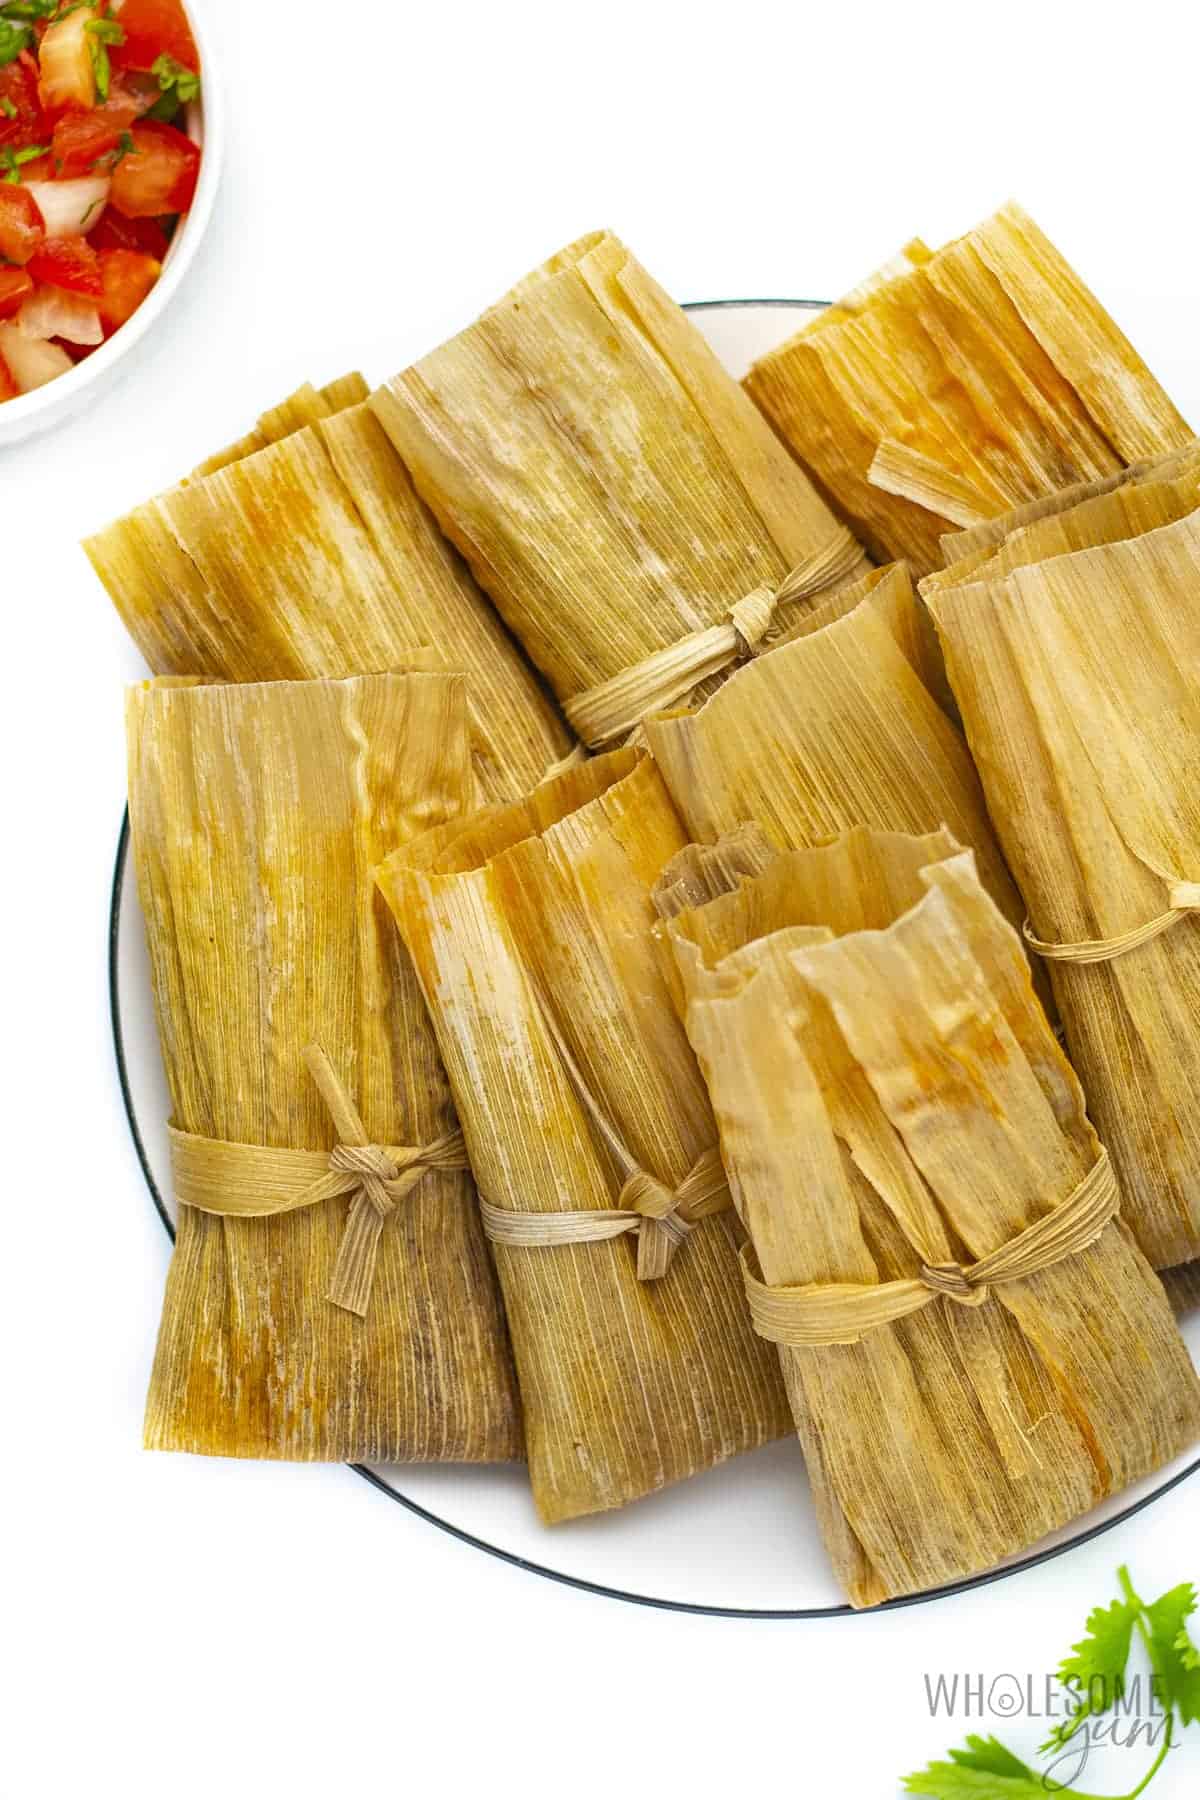 Keto friendly tamales on a plate with wrappers.